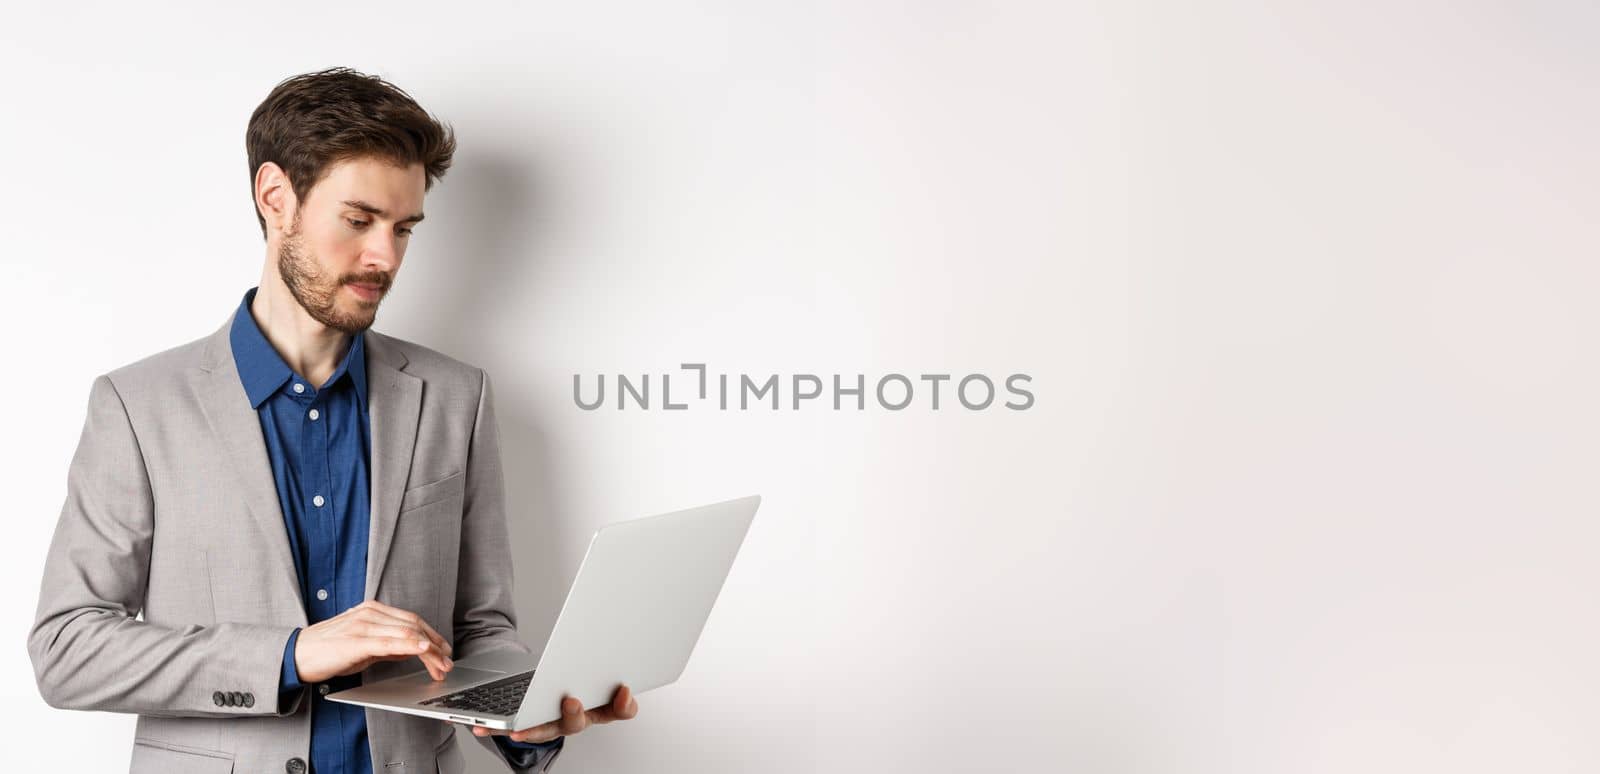 Handsome male entrepreneur working on laptop, looking serious at screen, standing against white background.